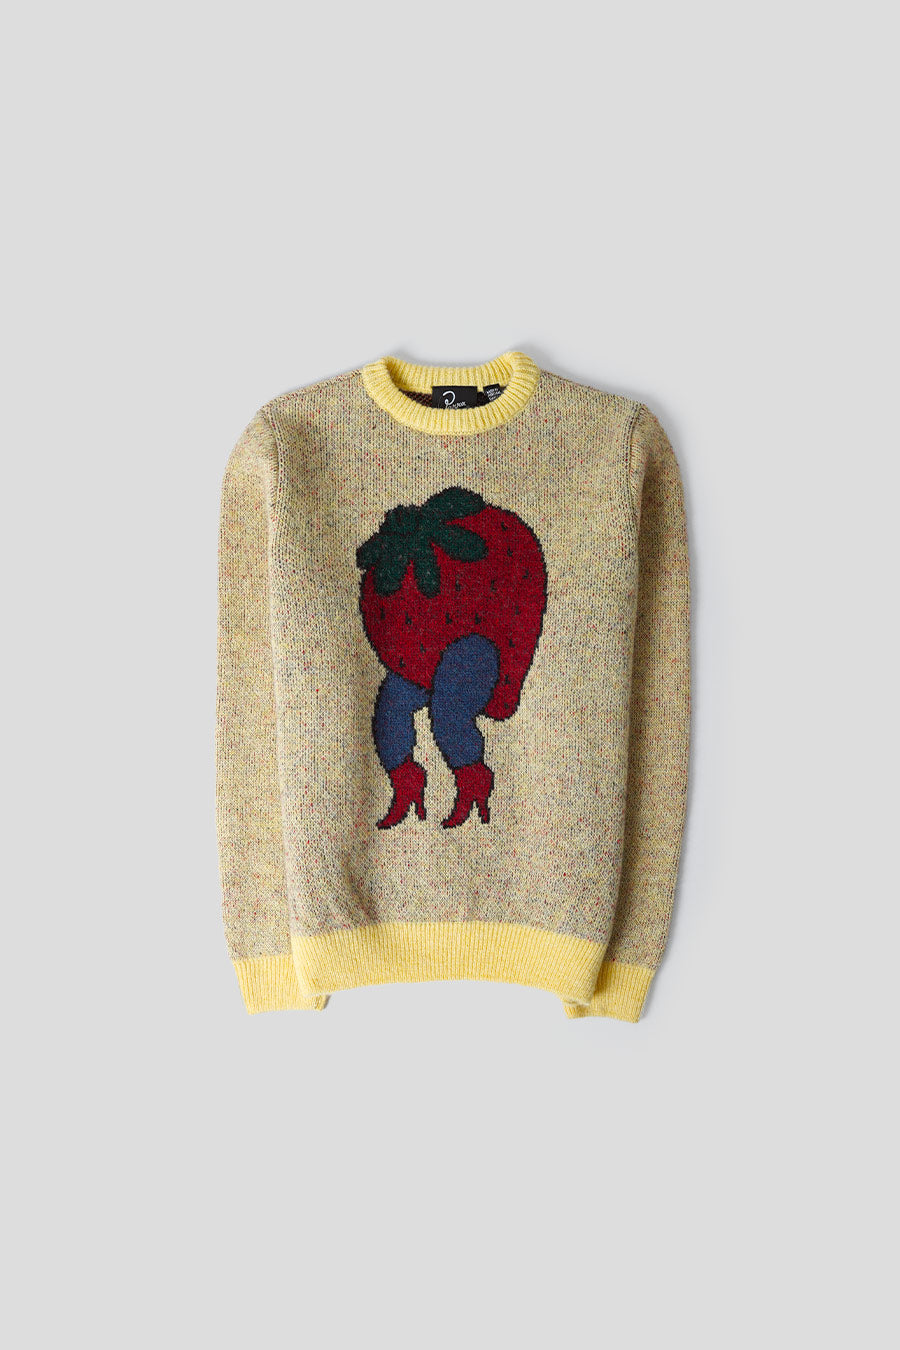 BY PARRA - PULL-OVER STUPID STRAWBERRY JAUNE - LE LABO STORE